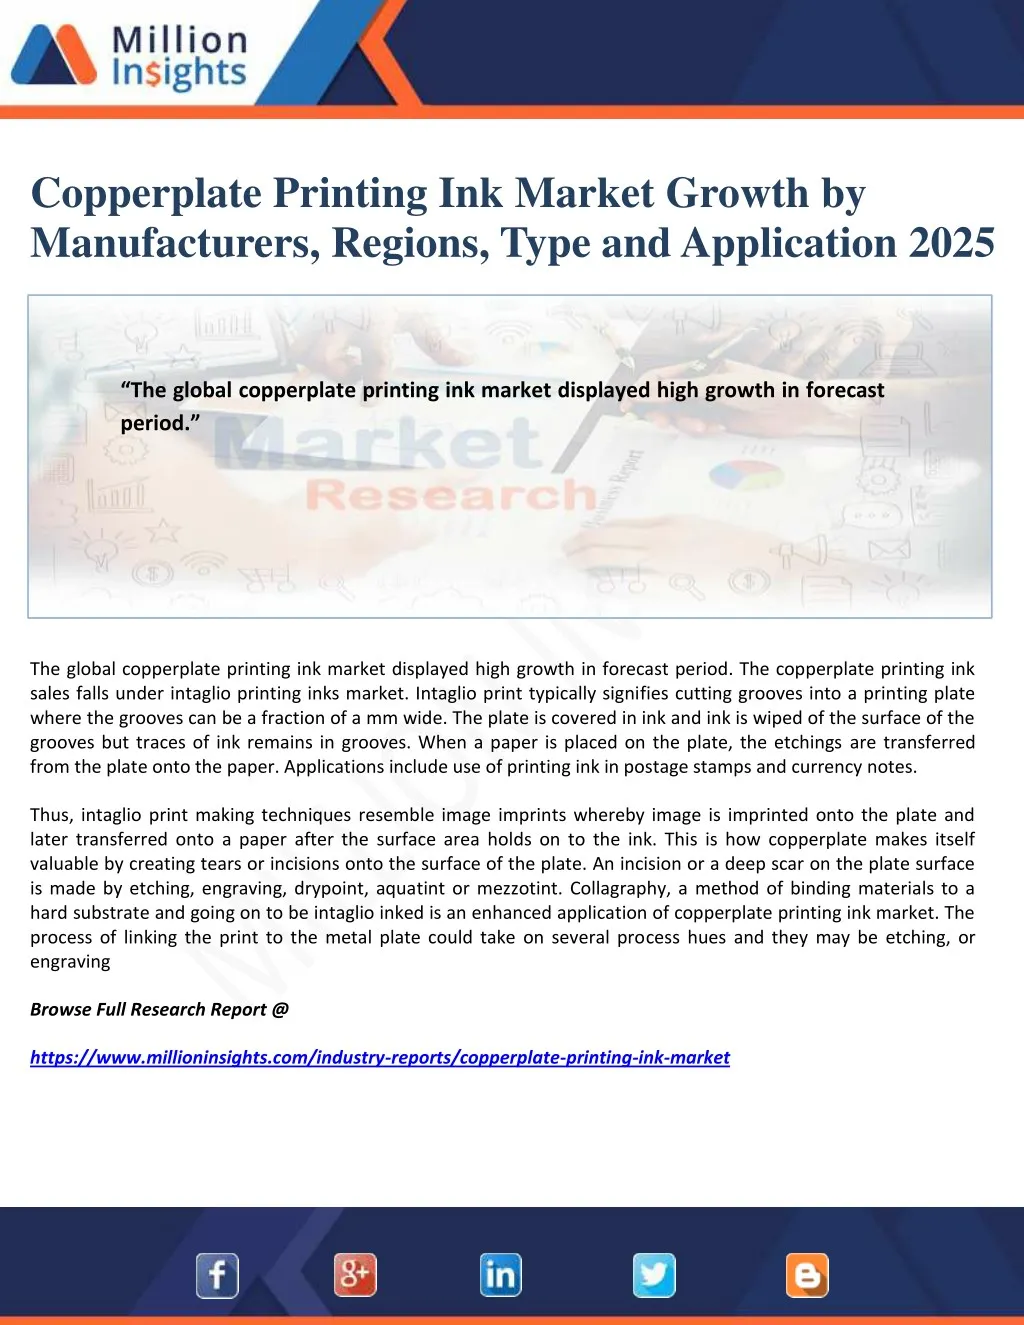 copperplate printing ink market growth